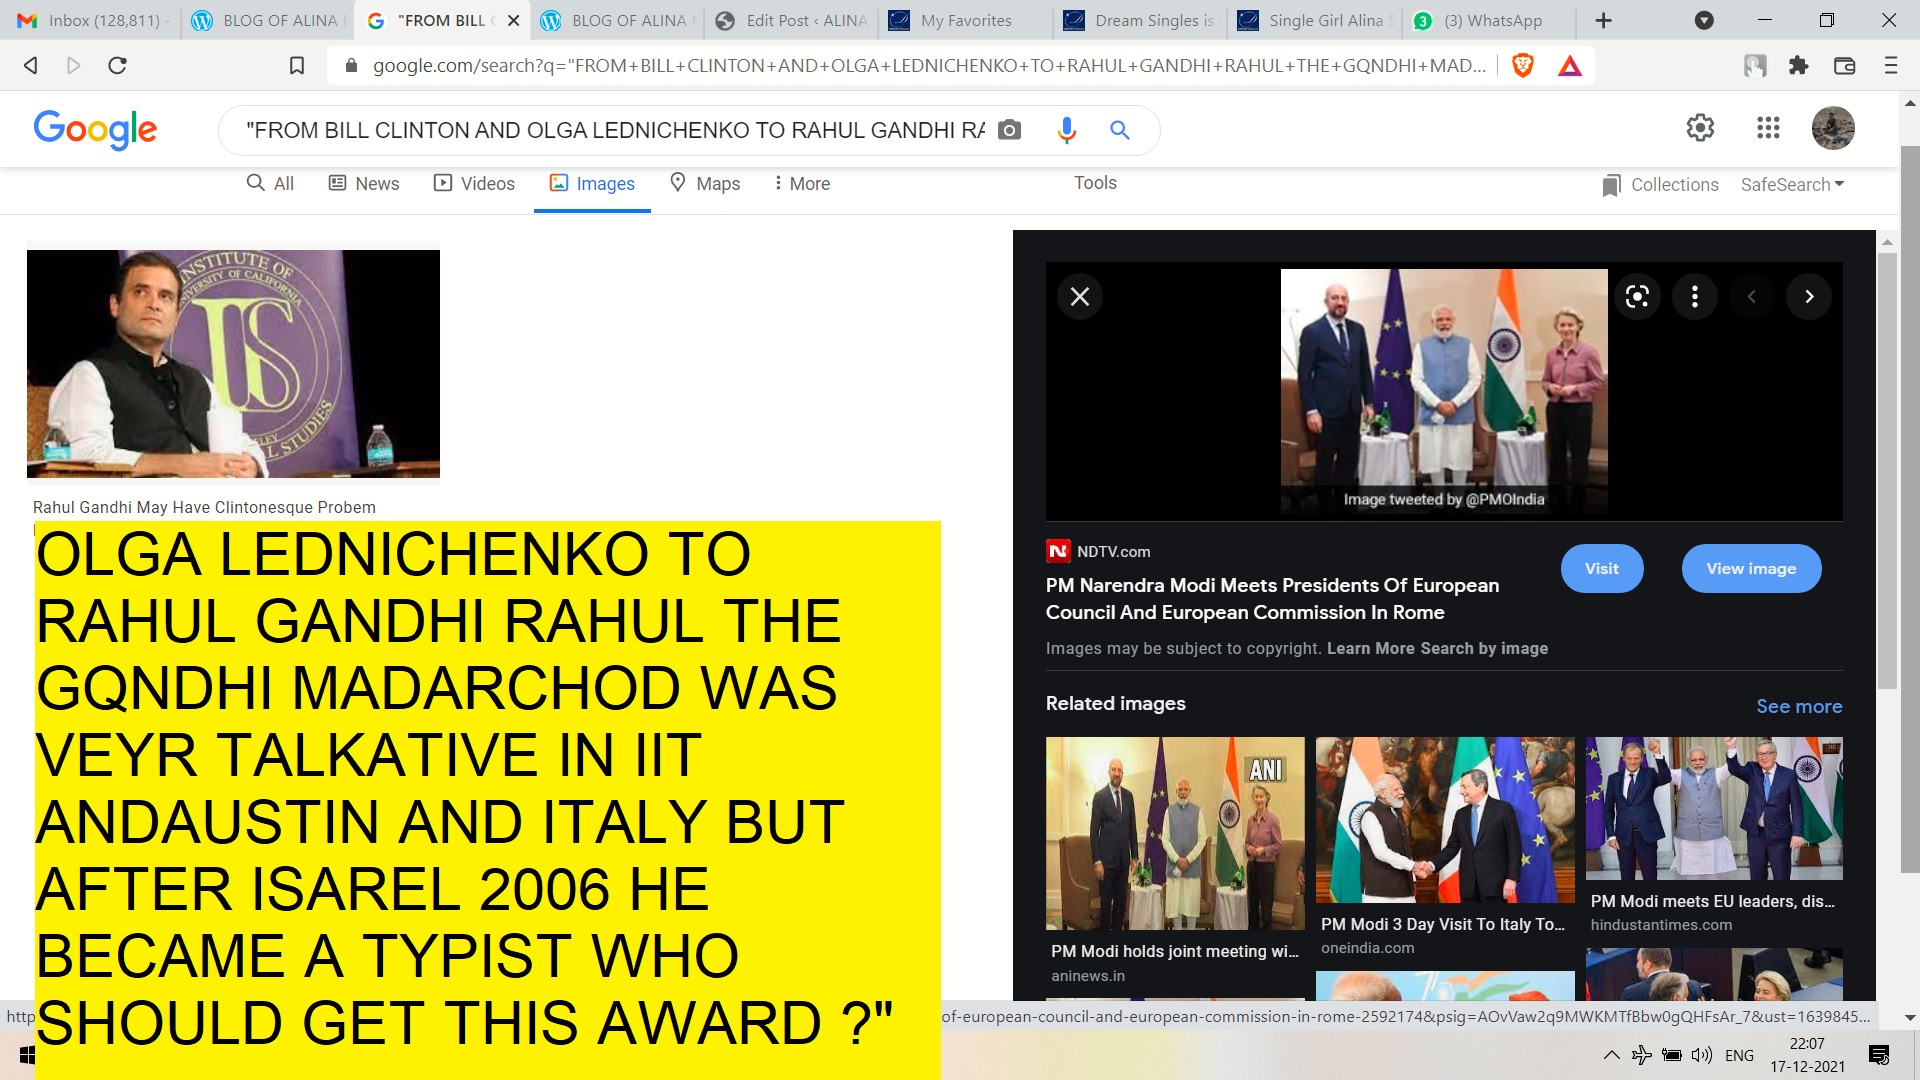 FROM BILL CLINTON AND OLGA LEDNICHENKO TO RAHUL GANDHI RAHUL THE GQNDHI MADARCHOD WAS VEYR TALKATIVE IN IIT ANDAUSTIN AND ITALY BUT AFTER ISAREL 2006 HE BECAME A TYPIST WHO SHOULD GET THIS AWARD